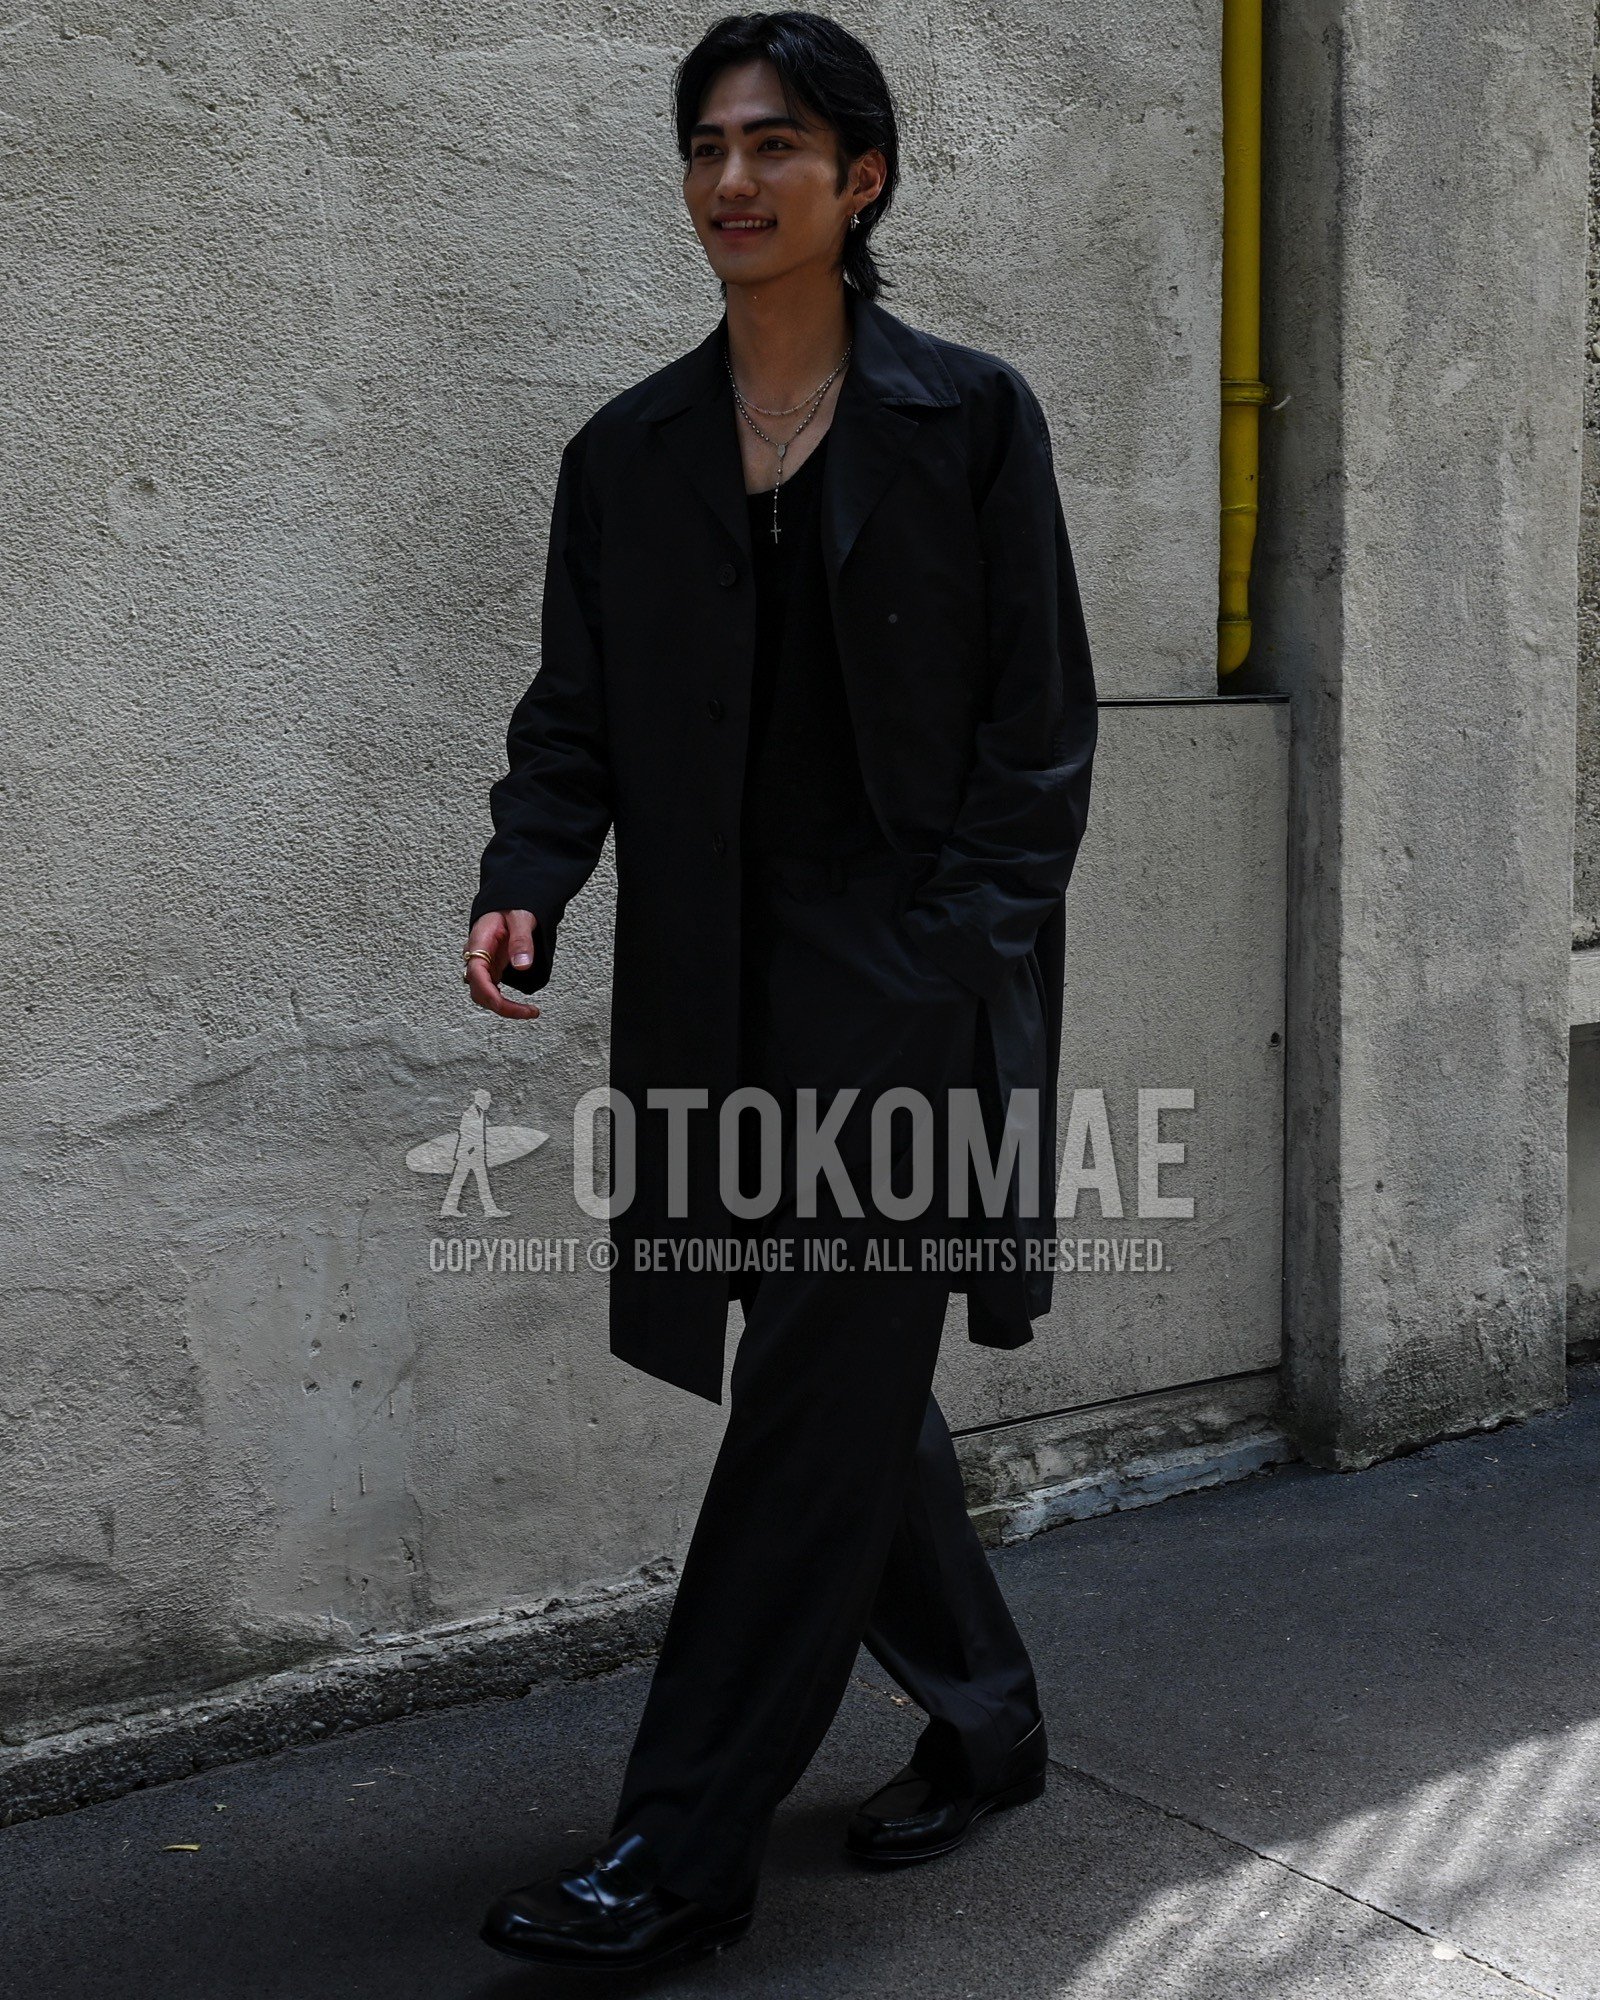 Men's spring autumn outfit with black plain stenkarrer coat, black plain t-shirt, black plain slacks, black coin loafers leather shoes.